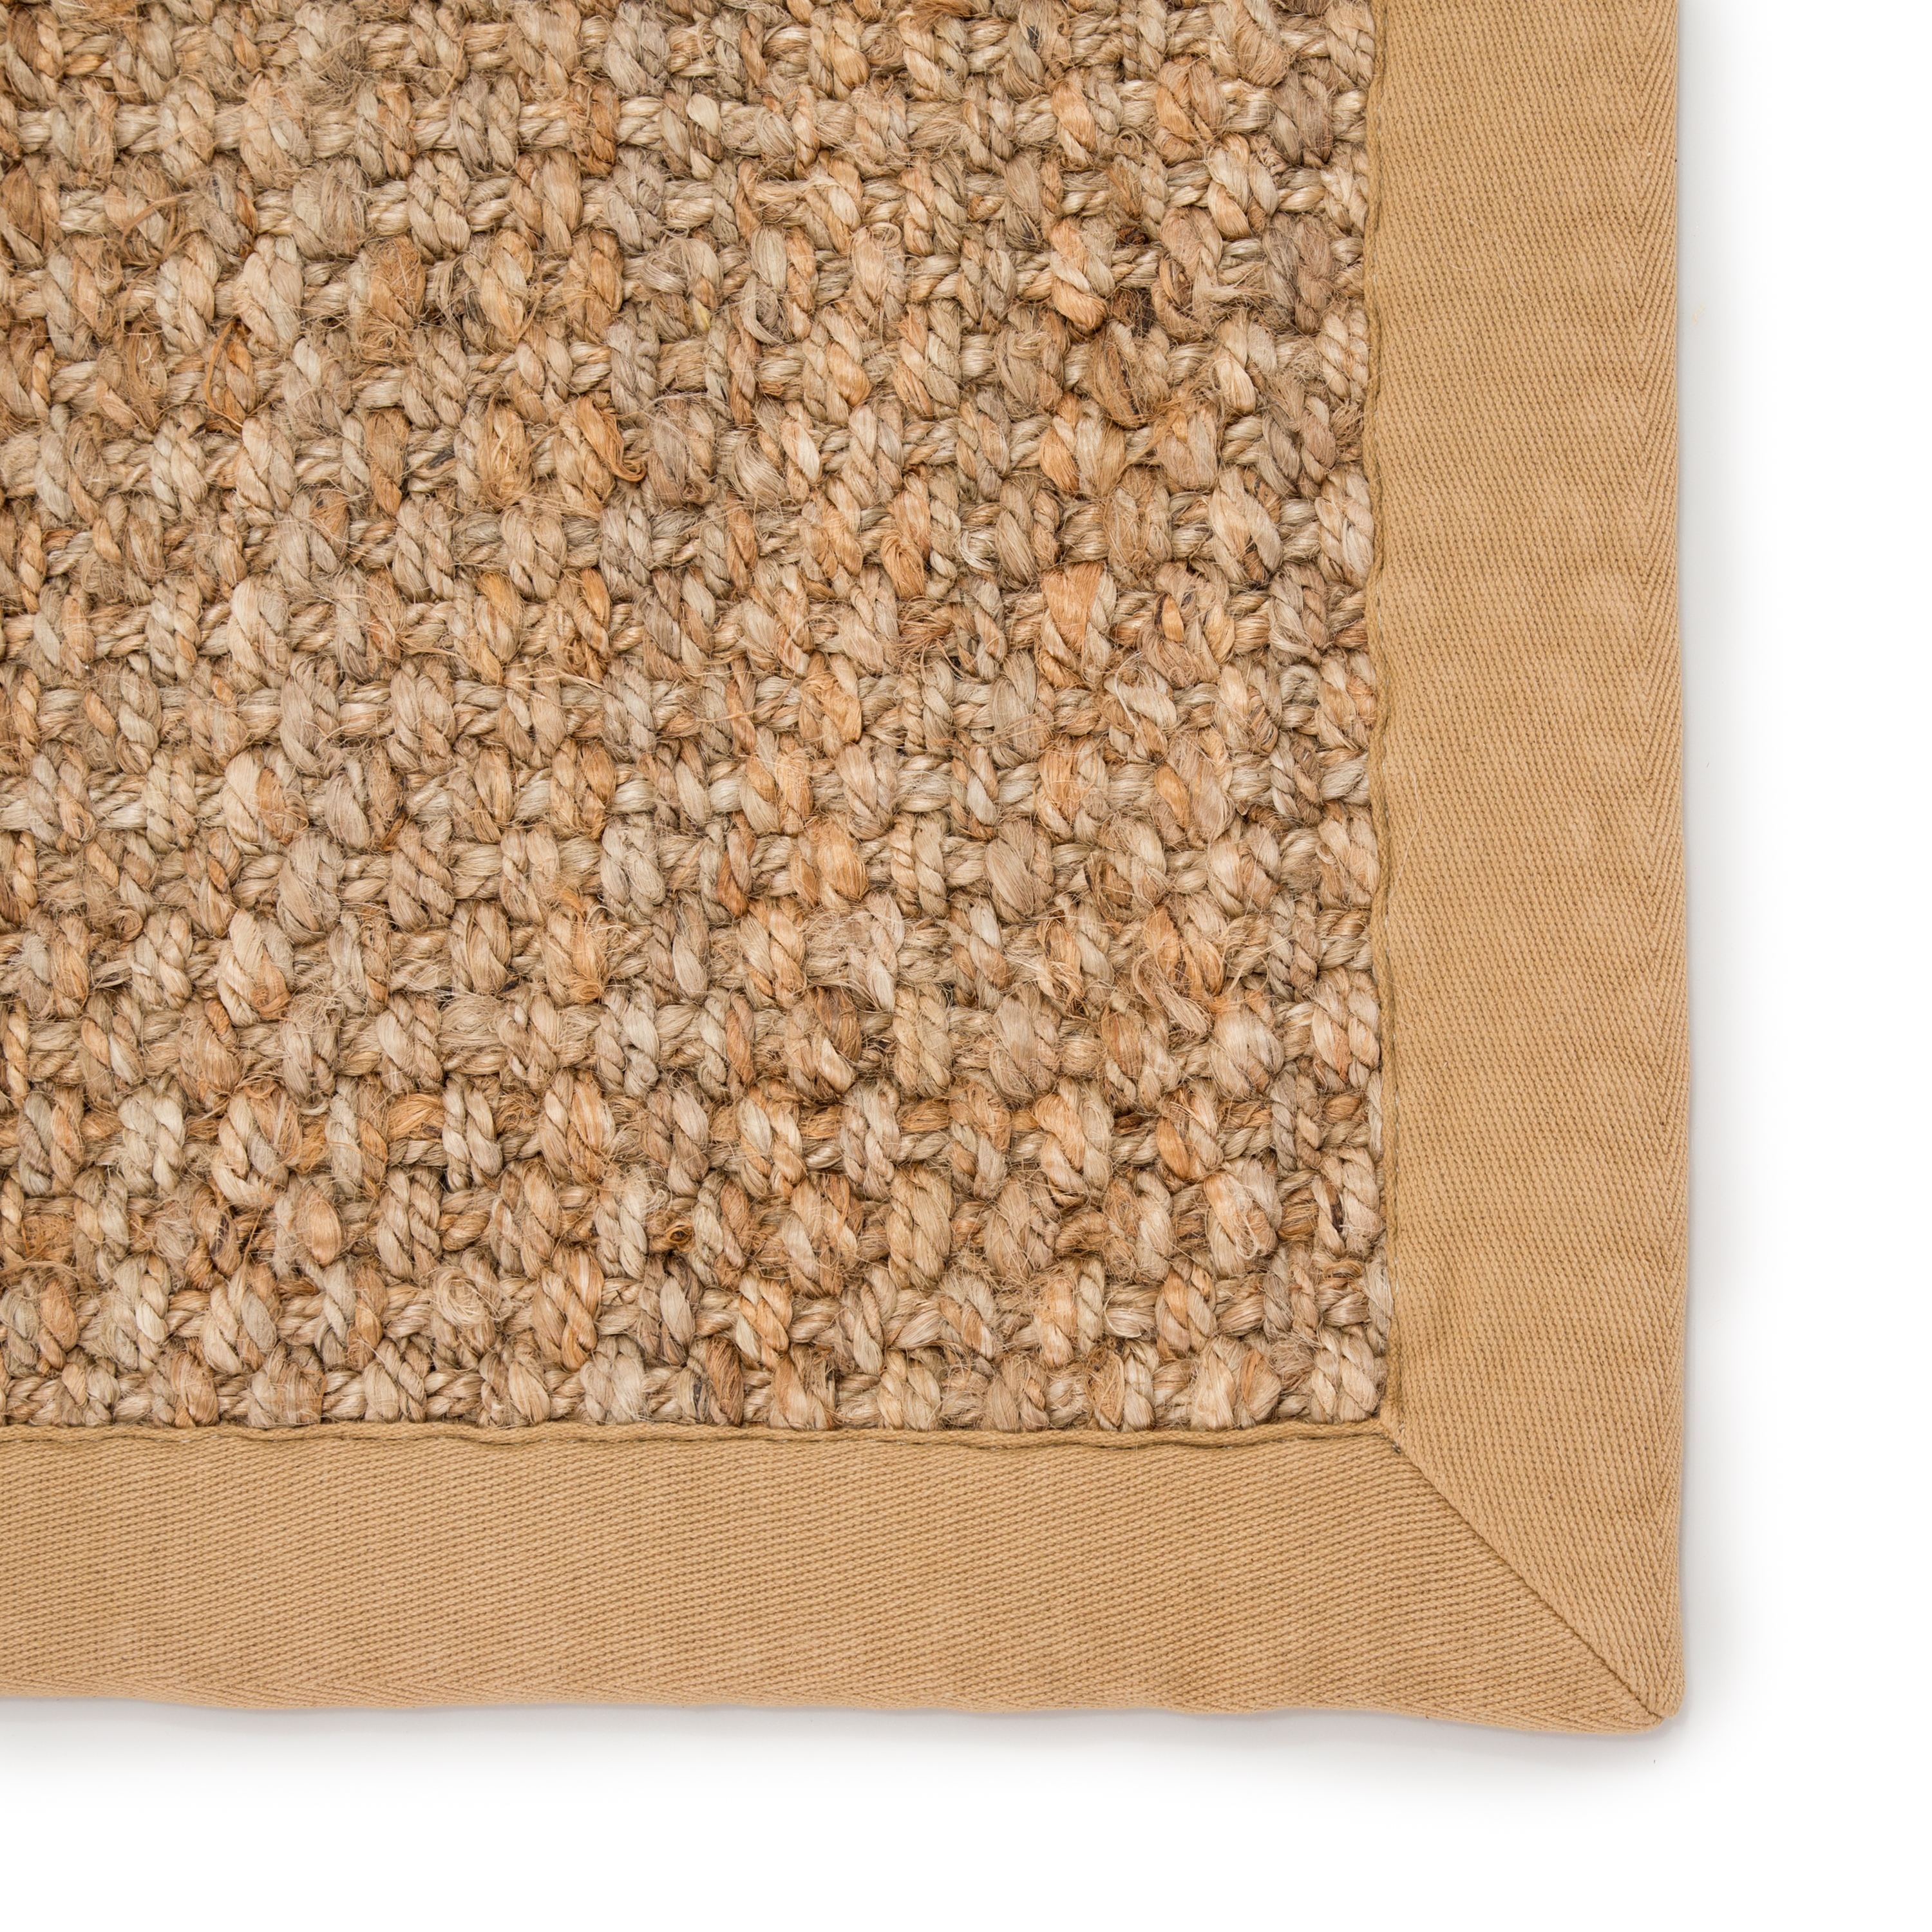 Adesina Natural Solid Beige Area Rug (8' X 10') - Image 3